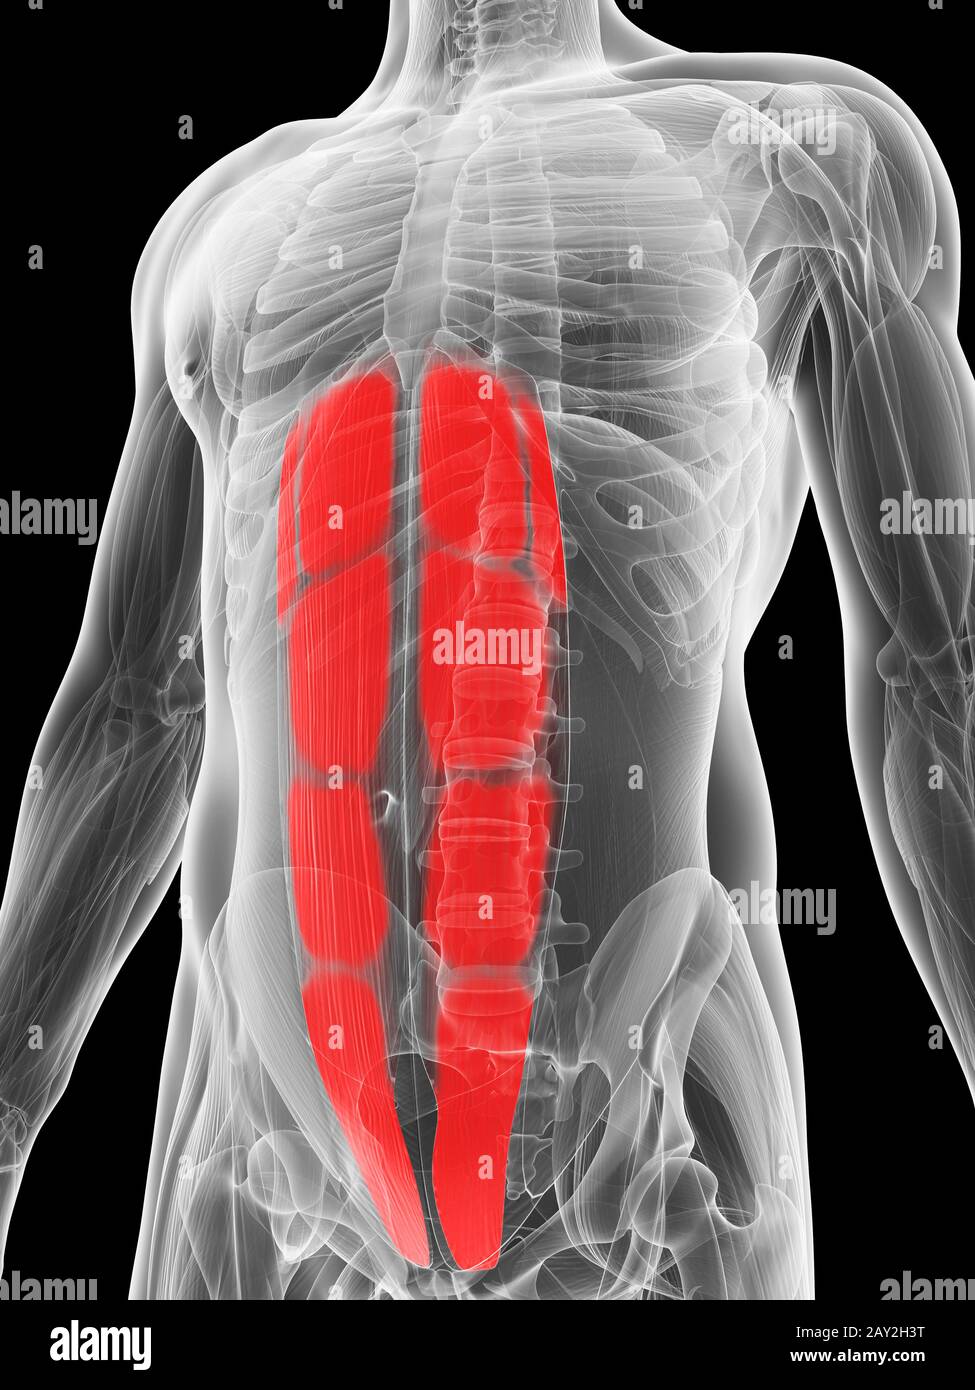 Abdominal Muscle Illustrations Stock Illustrations – 61 Abdominal Muscle  Illustrations Stock Illustrations, Vectors & Clipart - Dreamstime